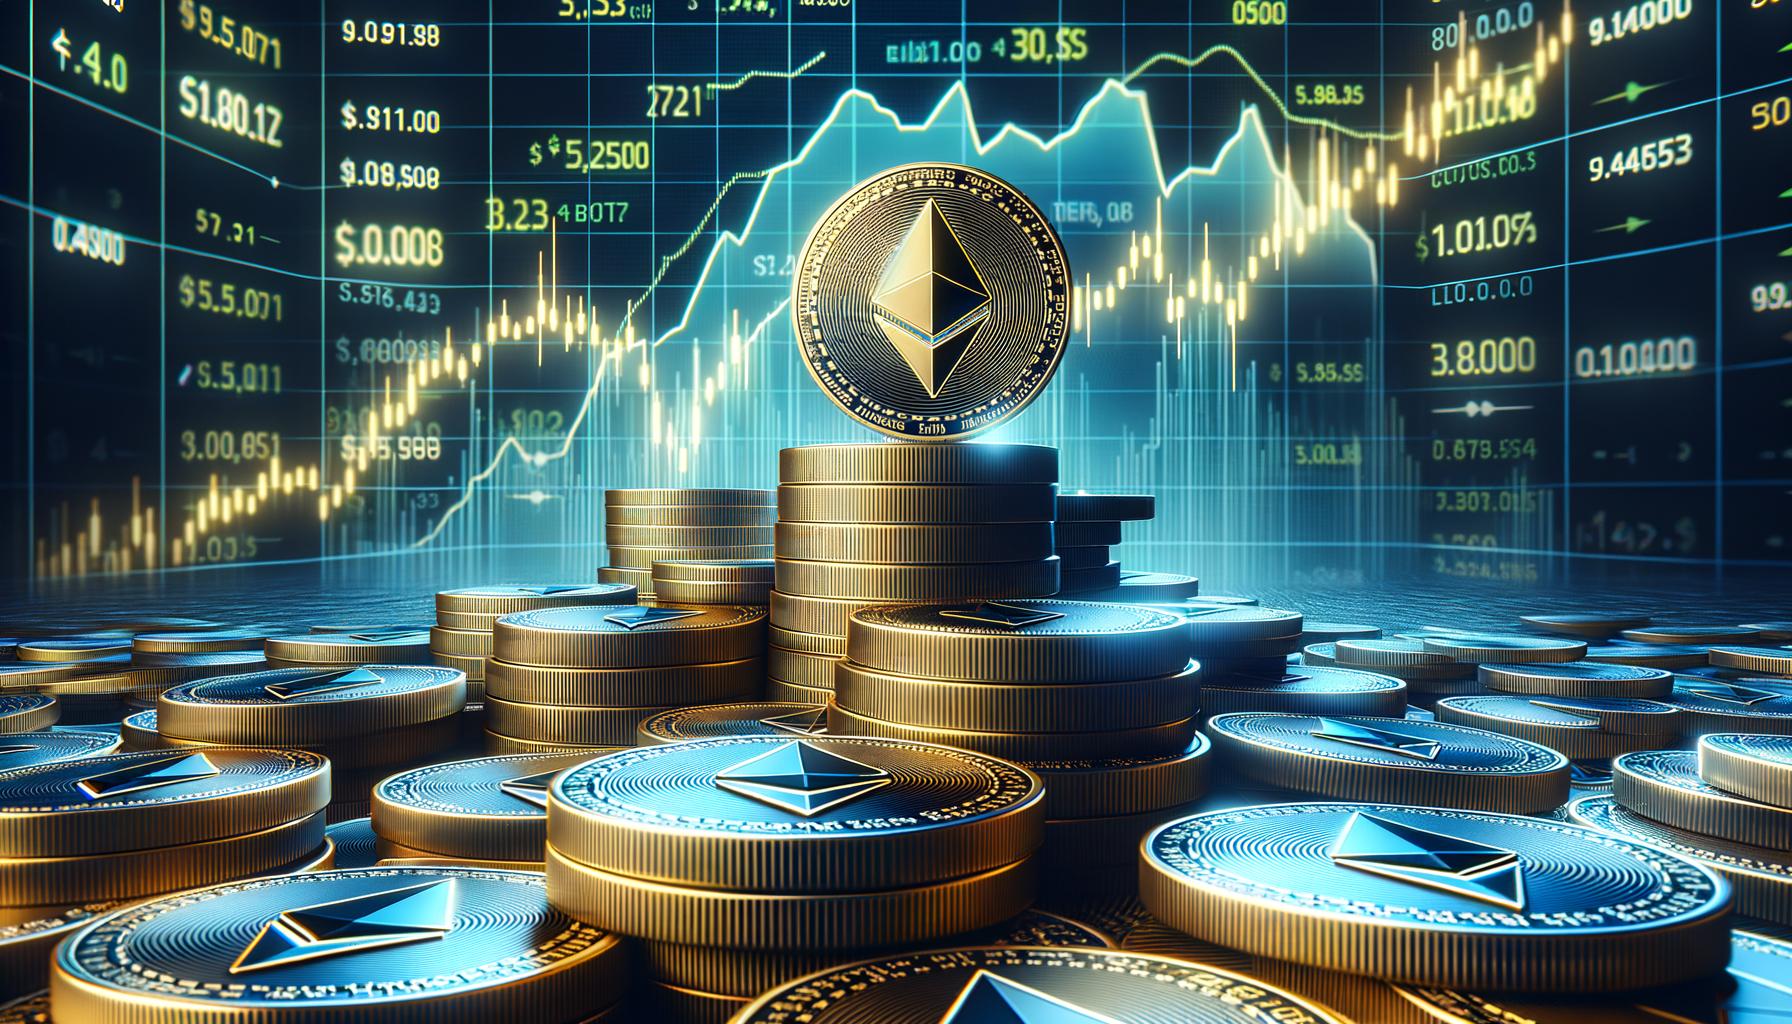 Ethereum In A Holding Pattern: Will It Break Out To Higher Levels?